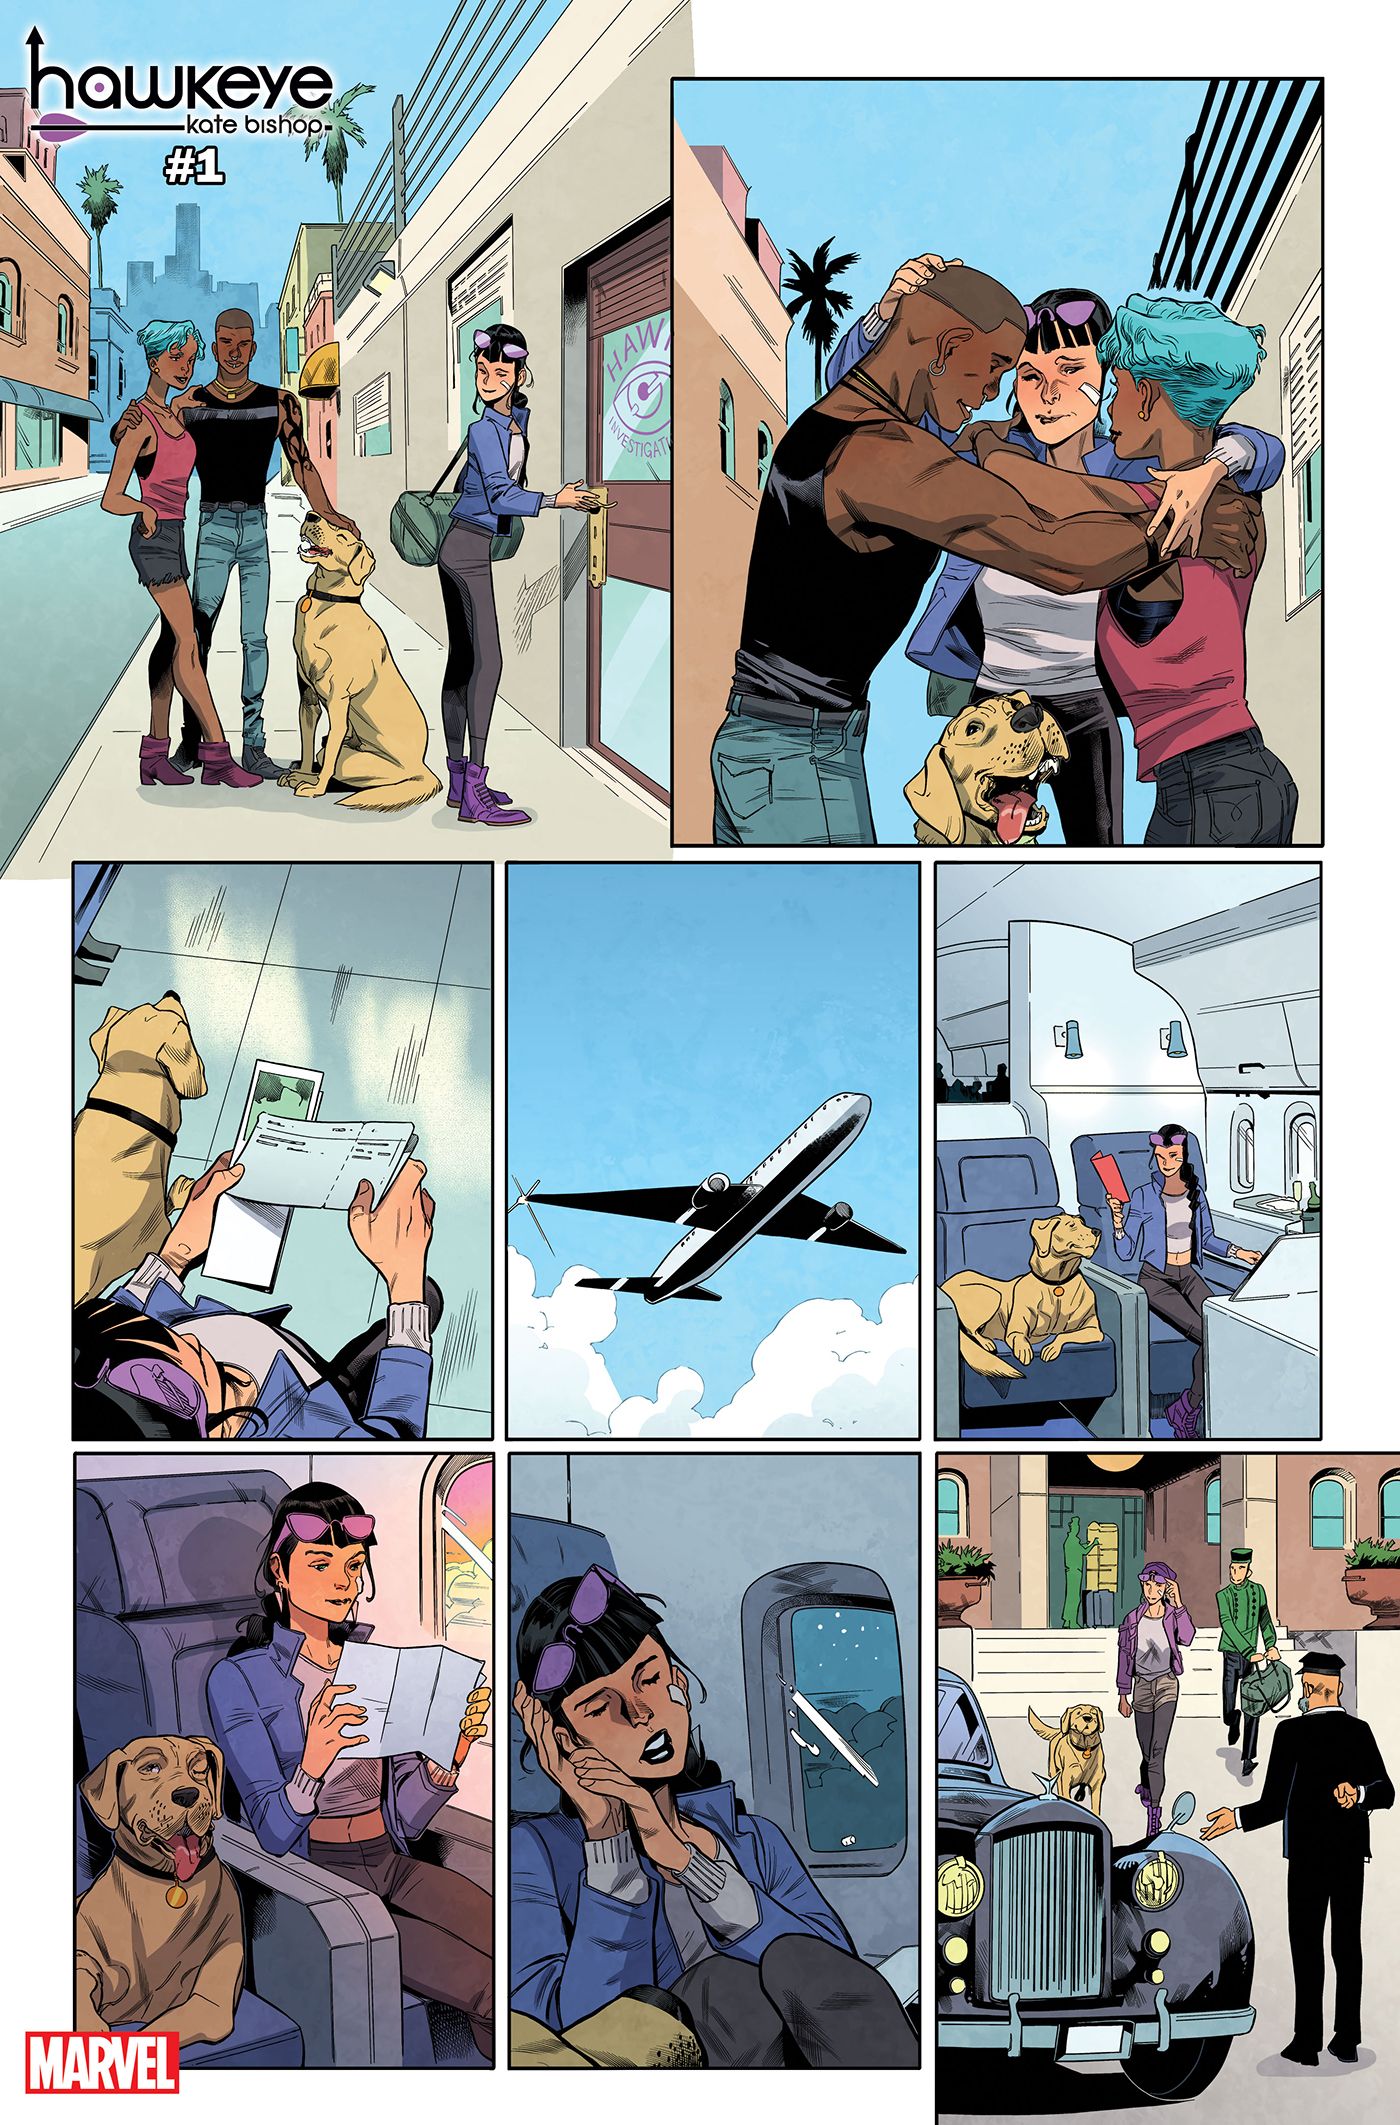 Kate Bishop takes a plane with her dog, Lucky.